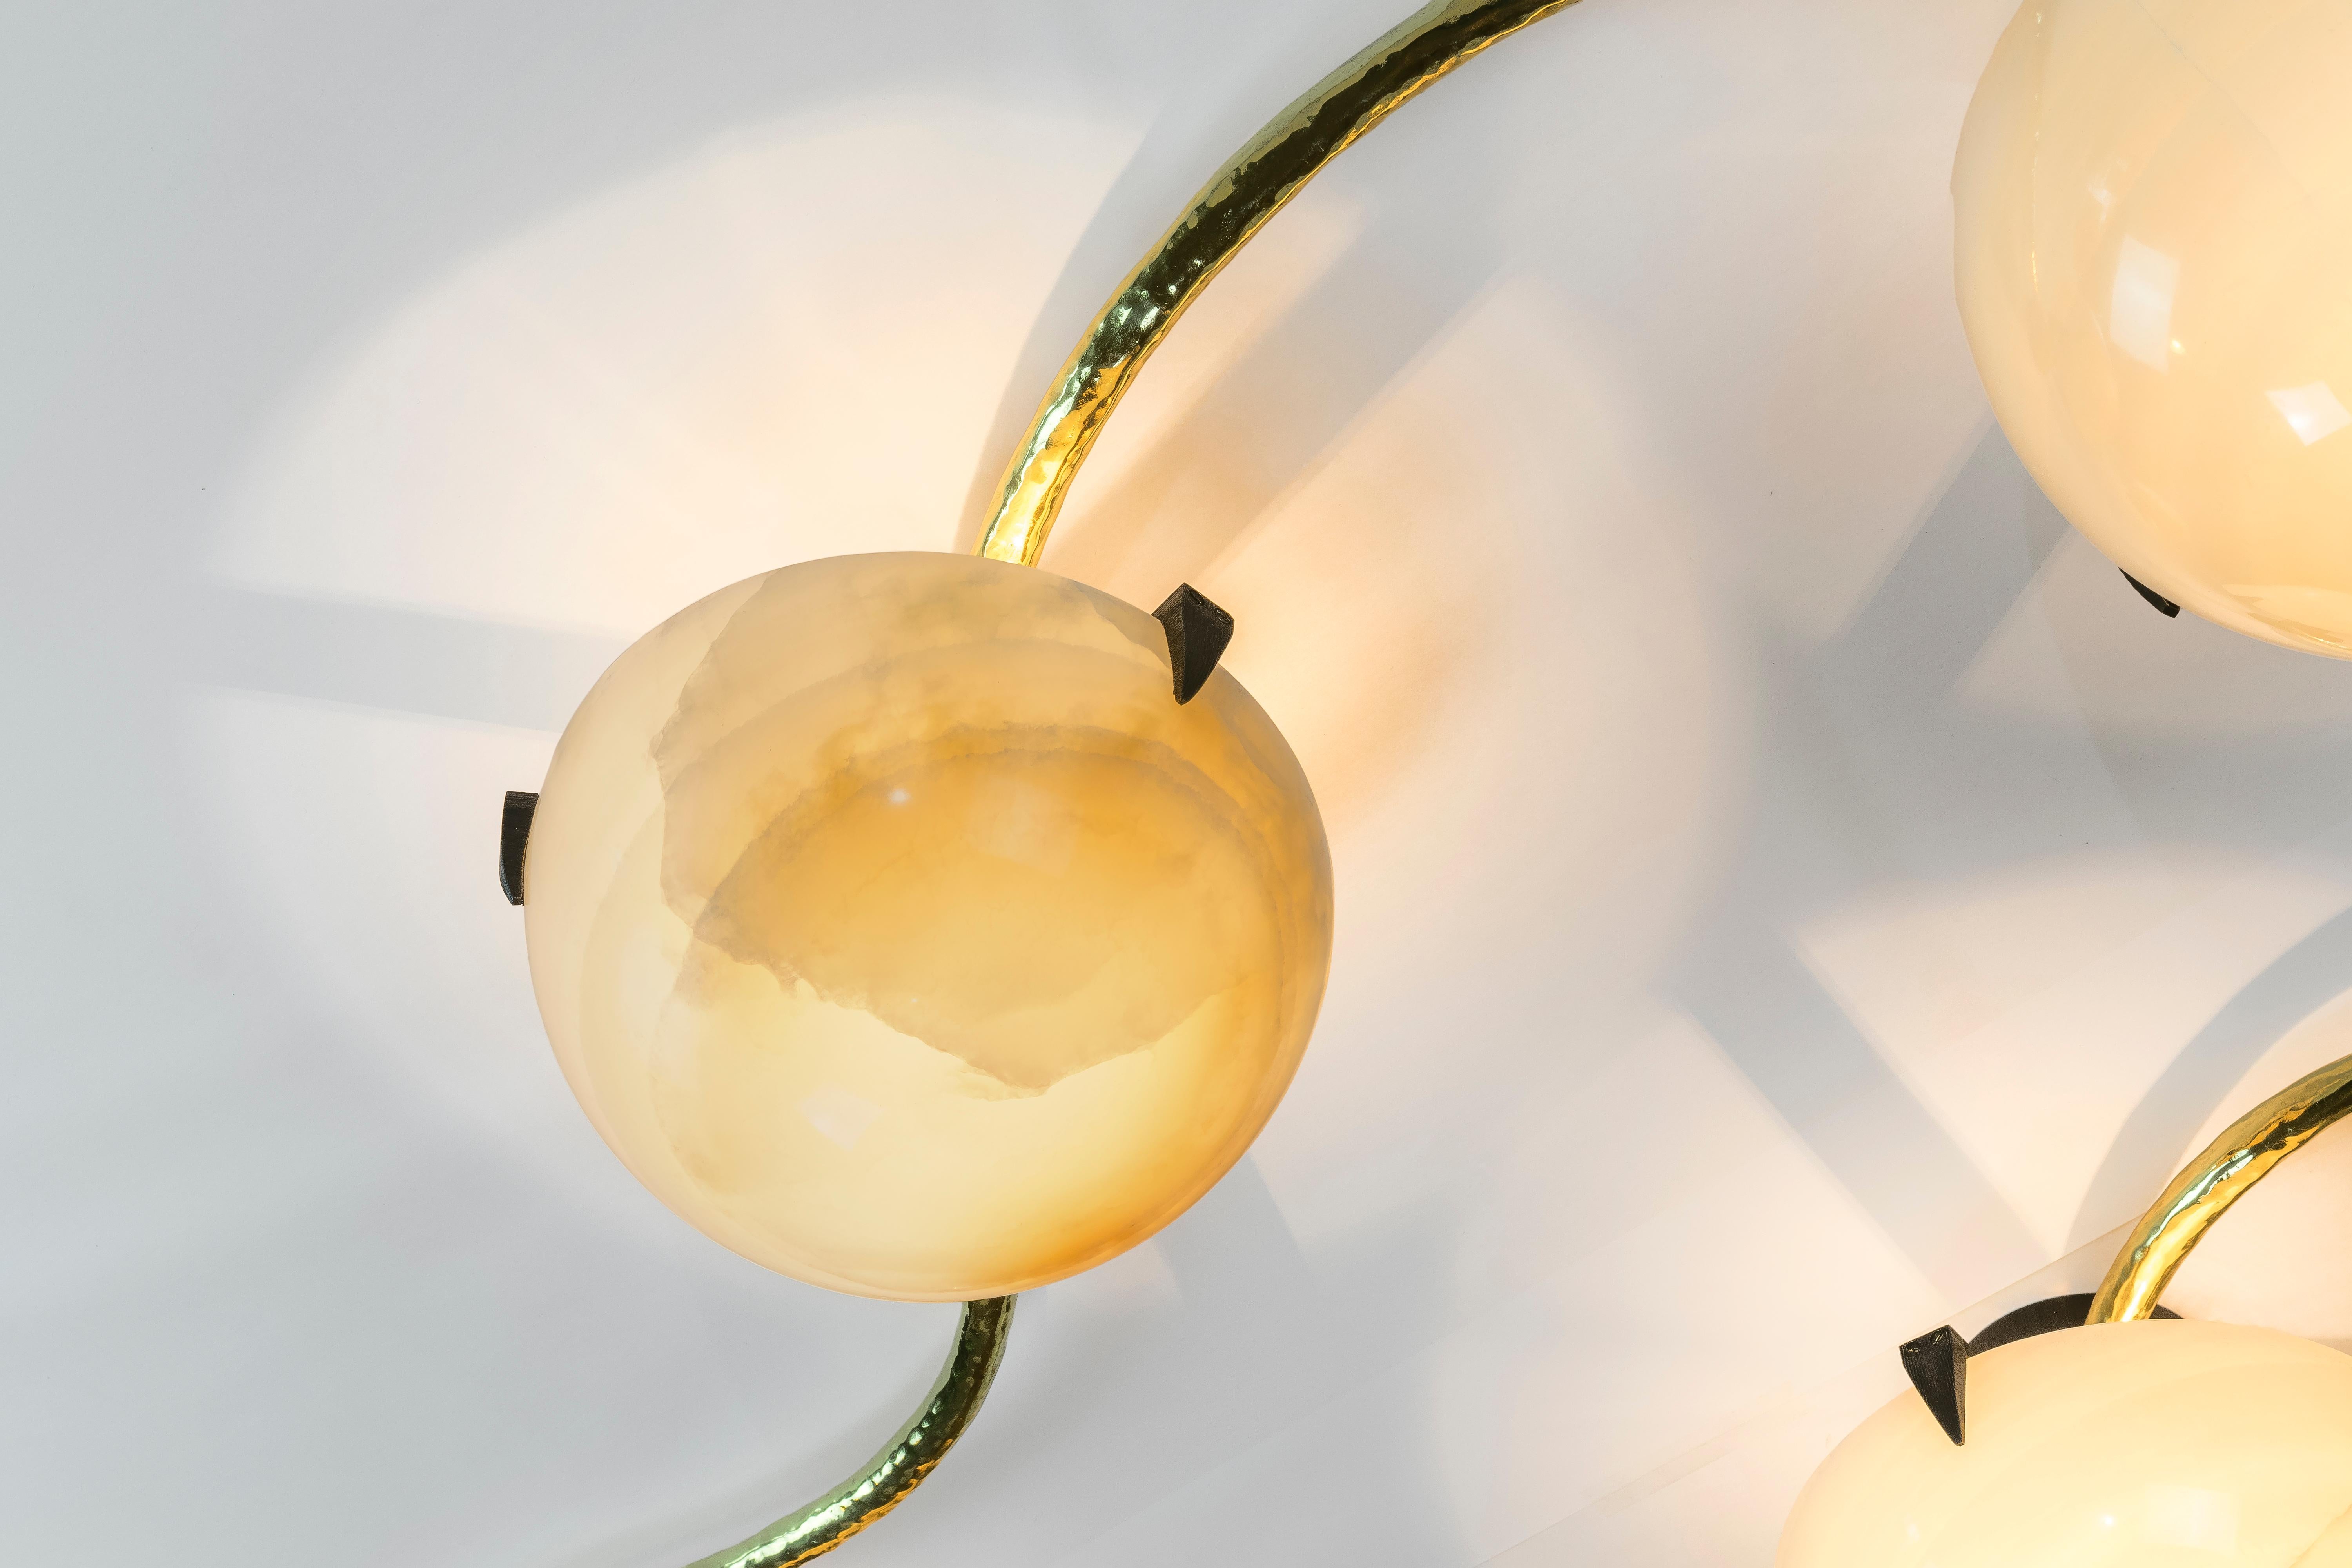 Achille Salvagni
Leros
2018
Back-lit hand carved onyx lamps; can be installed as a flush mounted ceiling chandelier or as a wall-mounted sconce. This work features a burnished cast bronze structure and hand-engraved brass clasps. Inspired by a